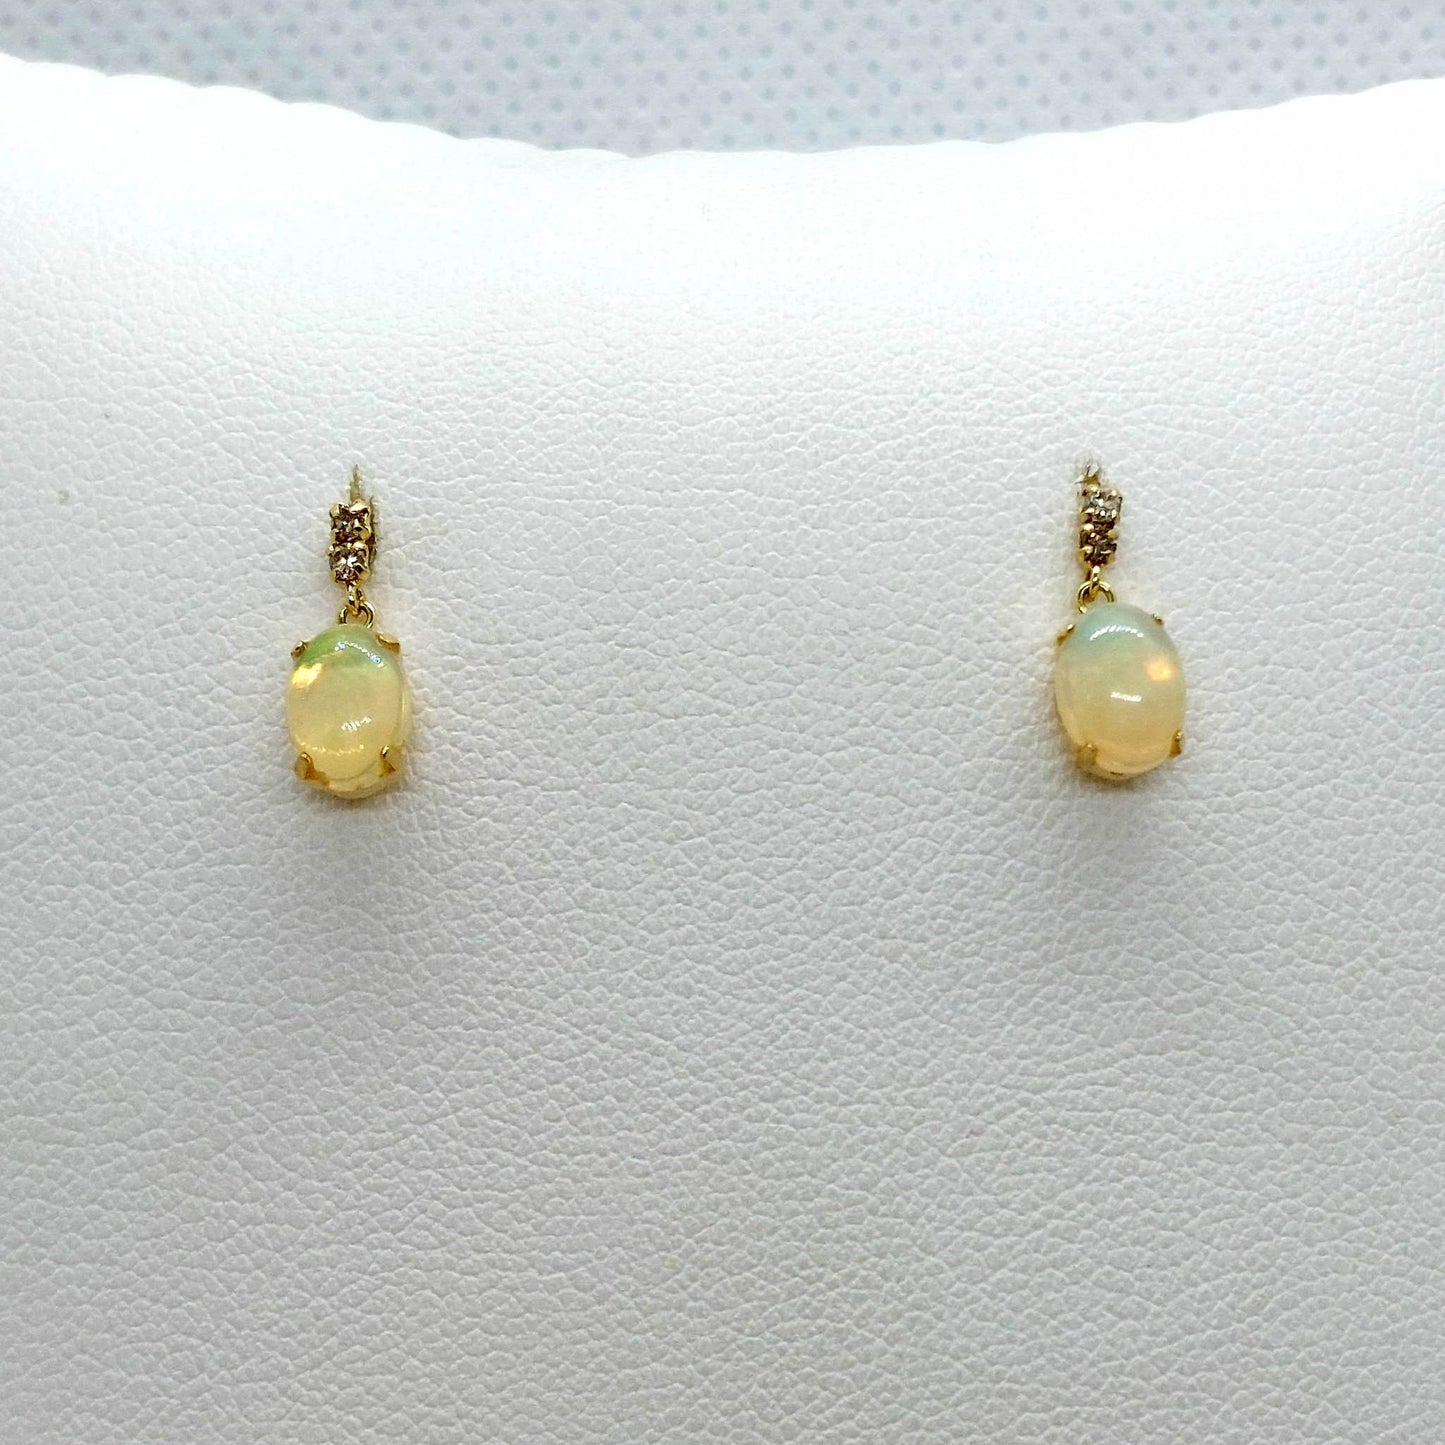 Natural Opal Earrings in Solid 18K Gold Made in Japan